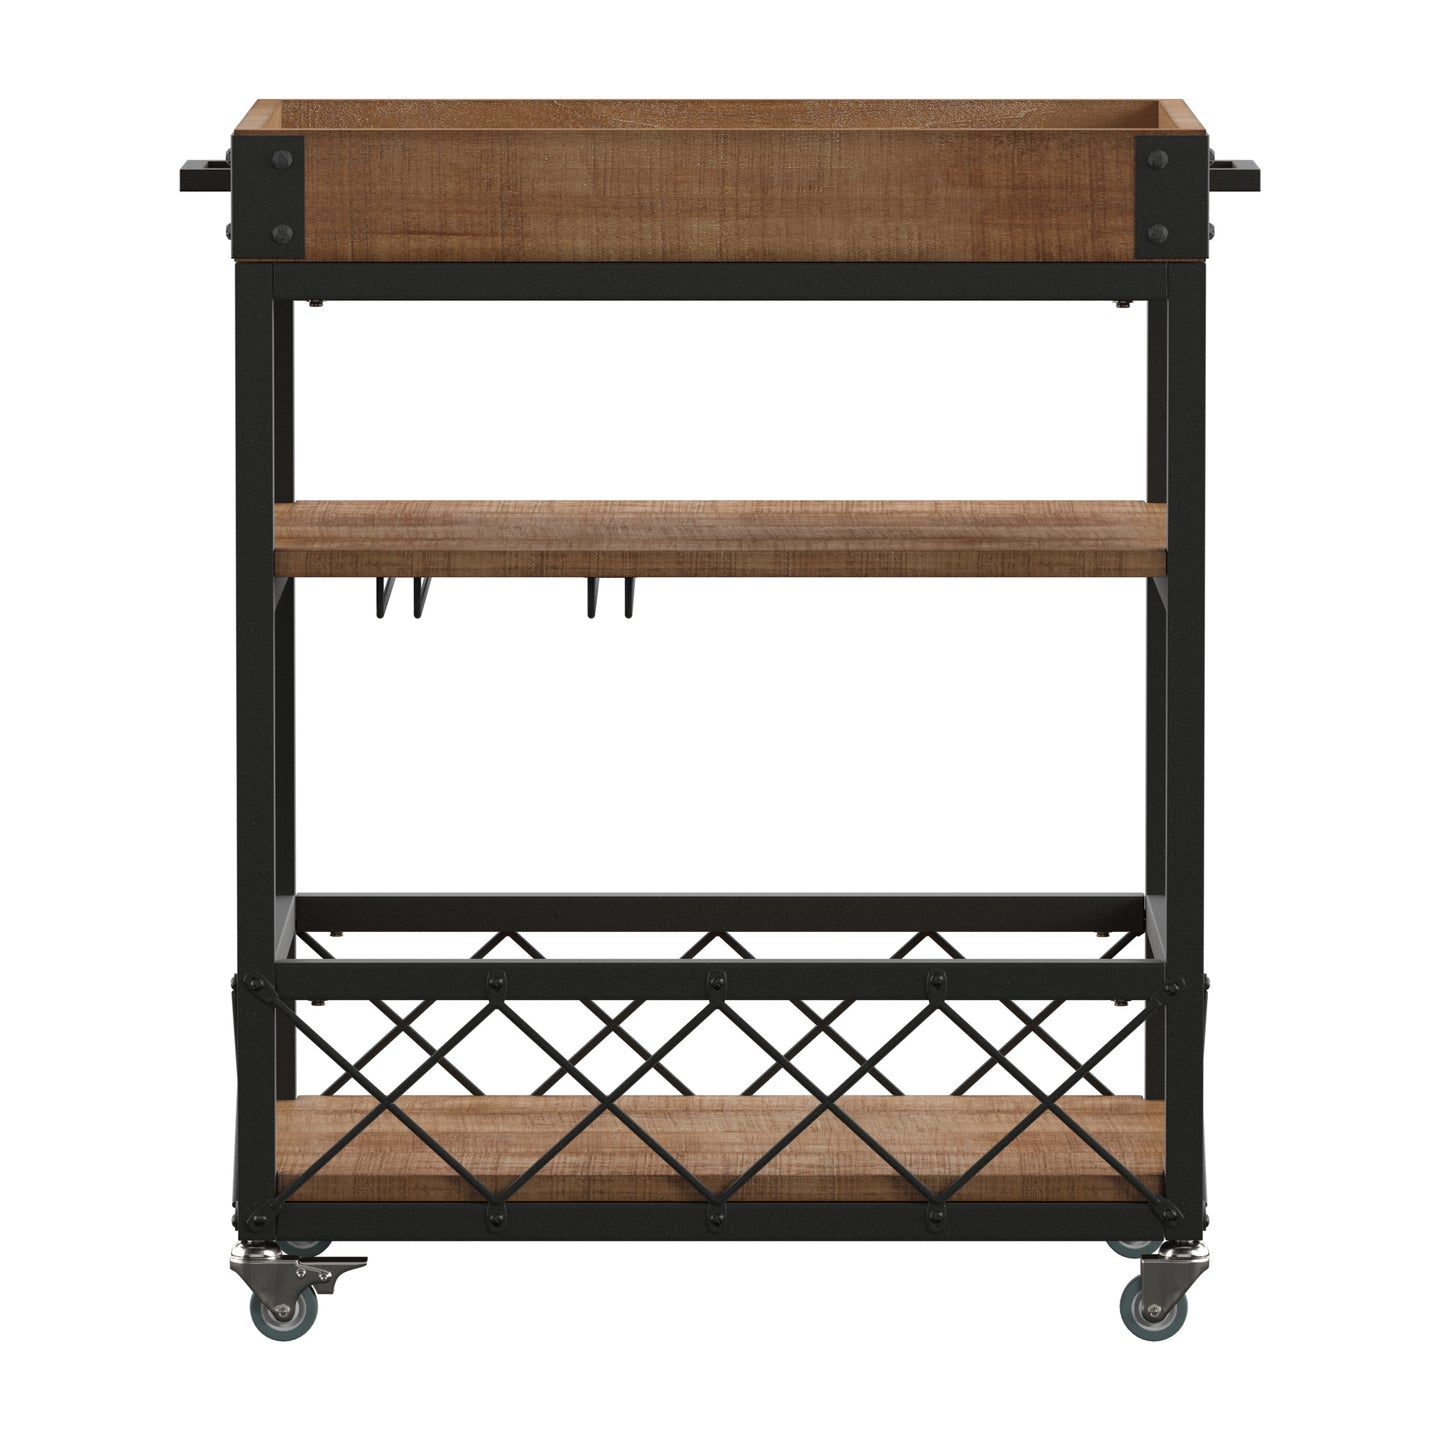 Rustic Serving Cart with Wine Inserts and Removable Tray Top - Oak Finish